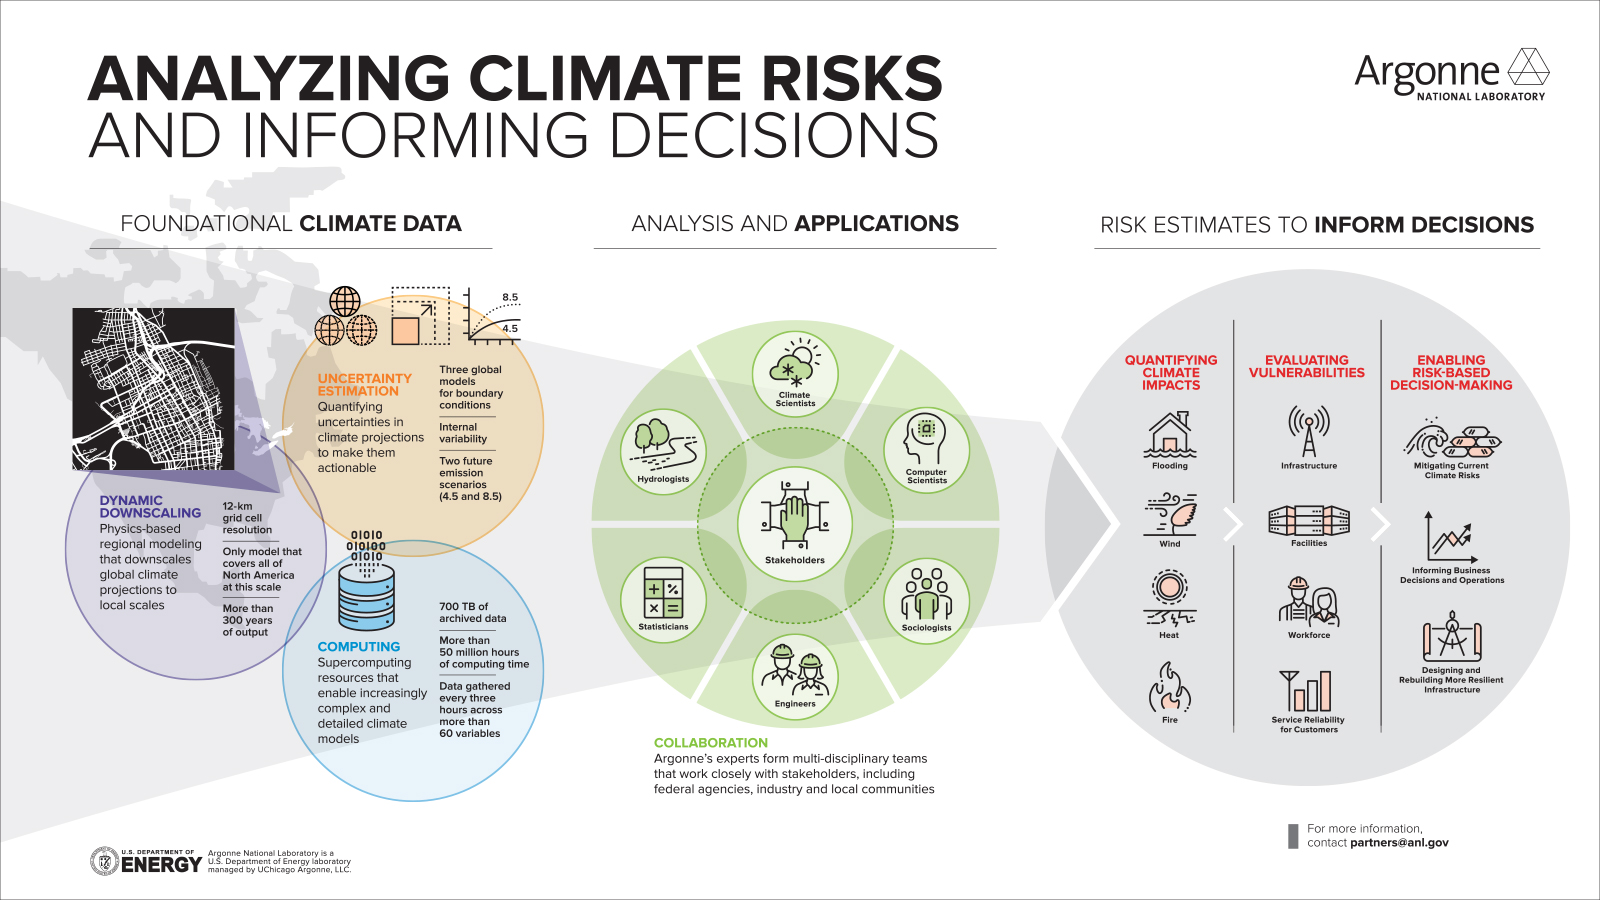 AnalyzIng Climate Risks and Informing Decisions